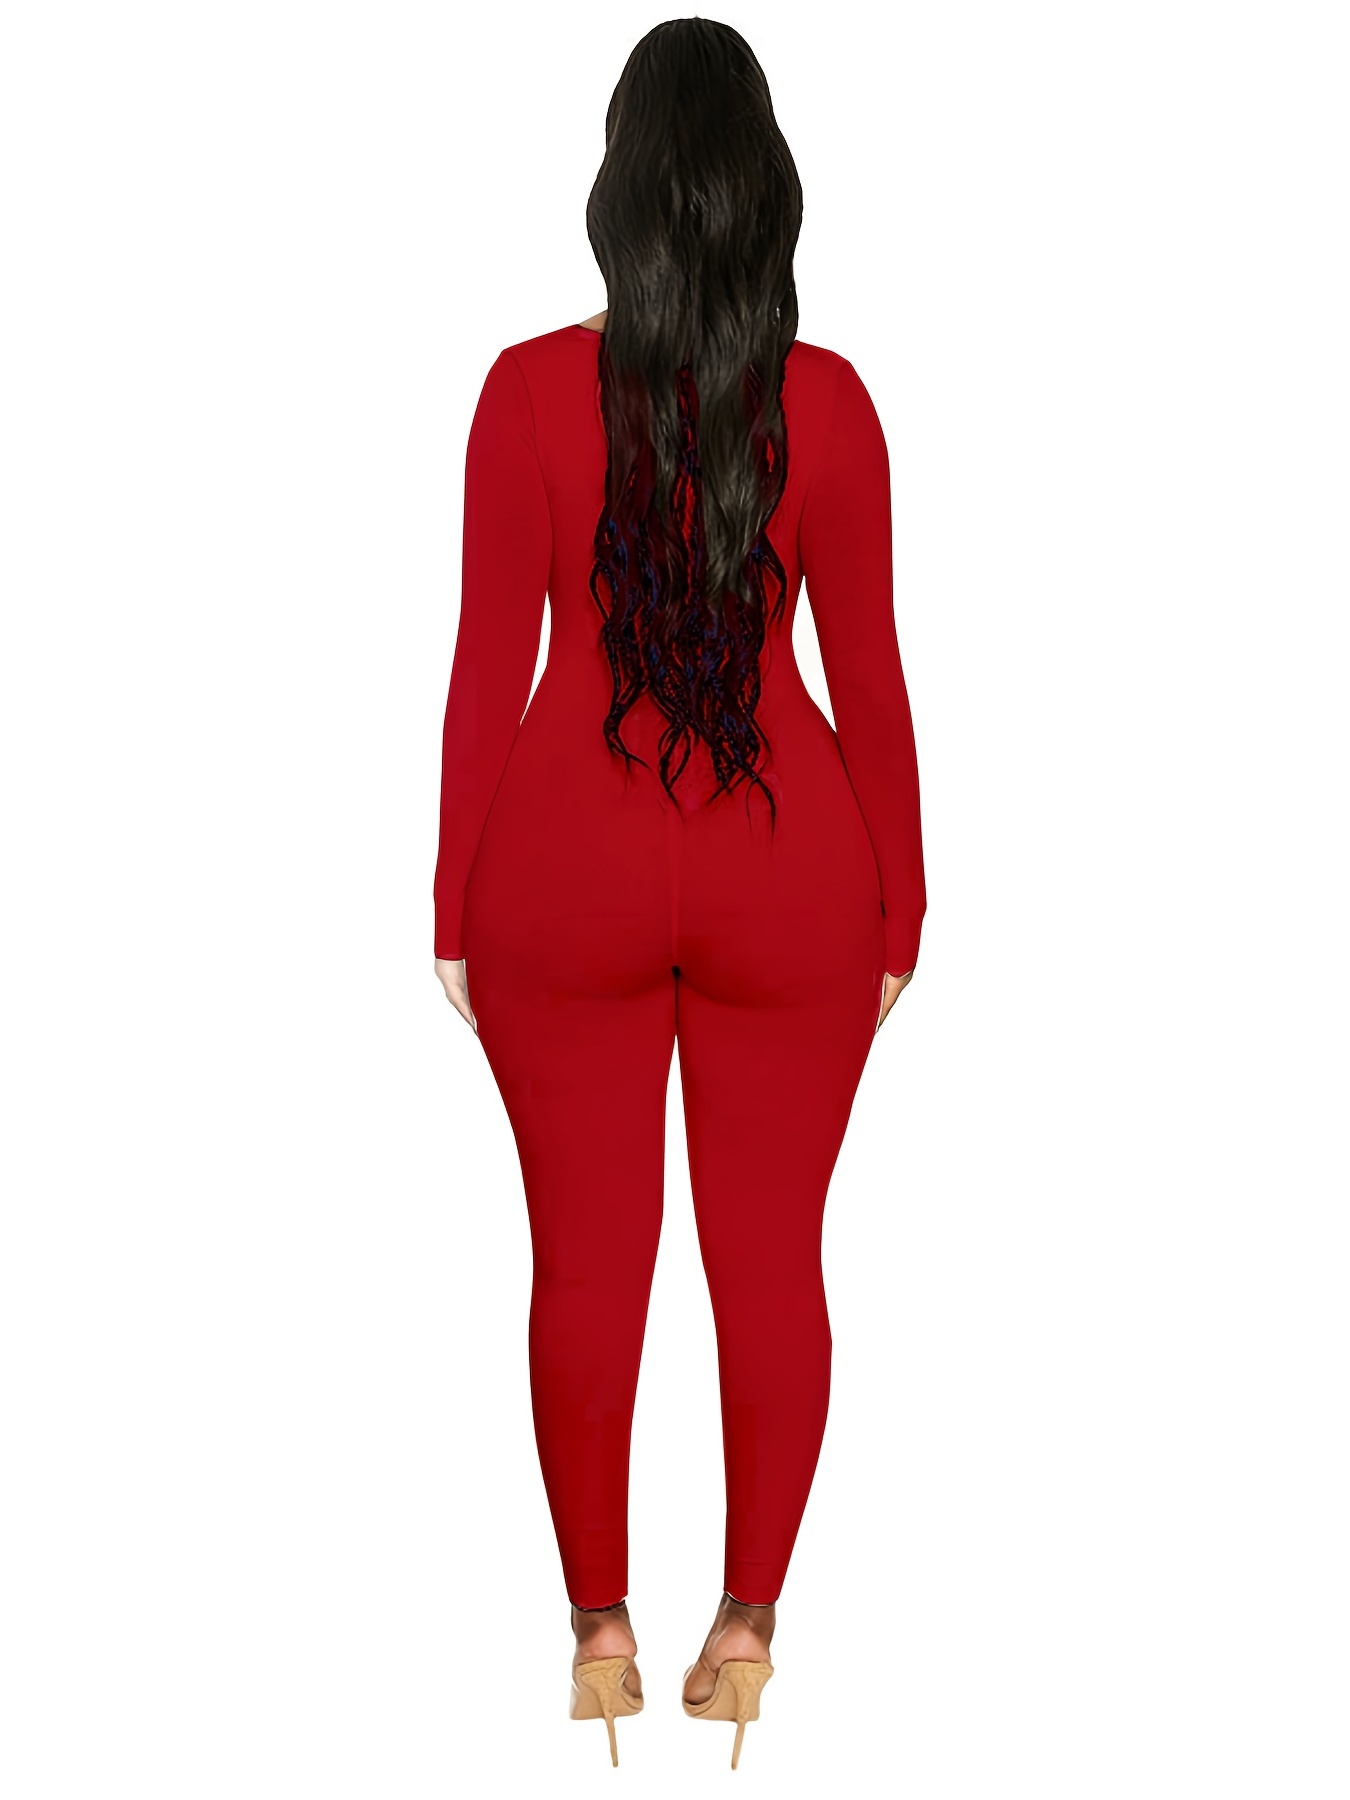 Women Summer Sexy Sleeveless Fashion Prints Waist Skimming Jumpsuit Long  Sleeves Body Suit Tops for Women (Red, M)